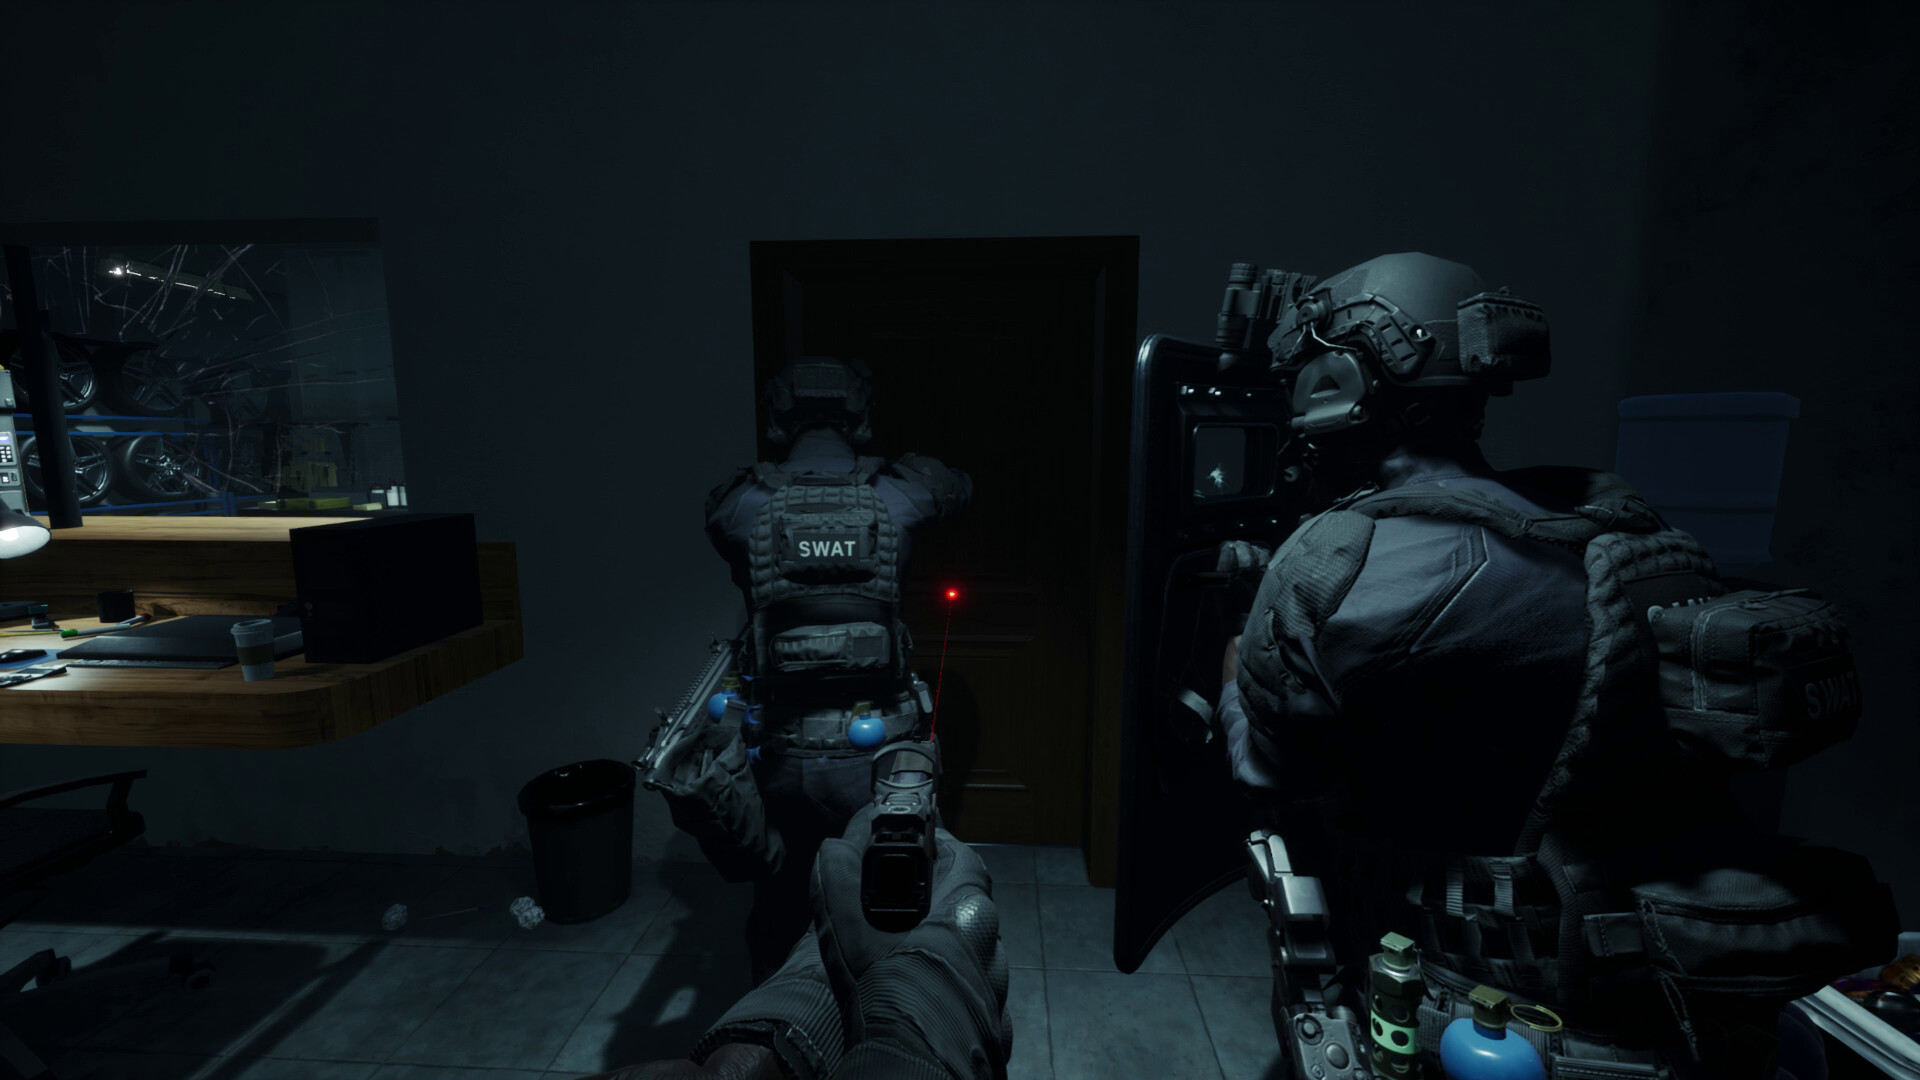 Tactical Squad: SWAT Stories on Steam